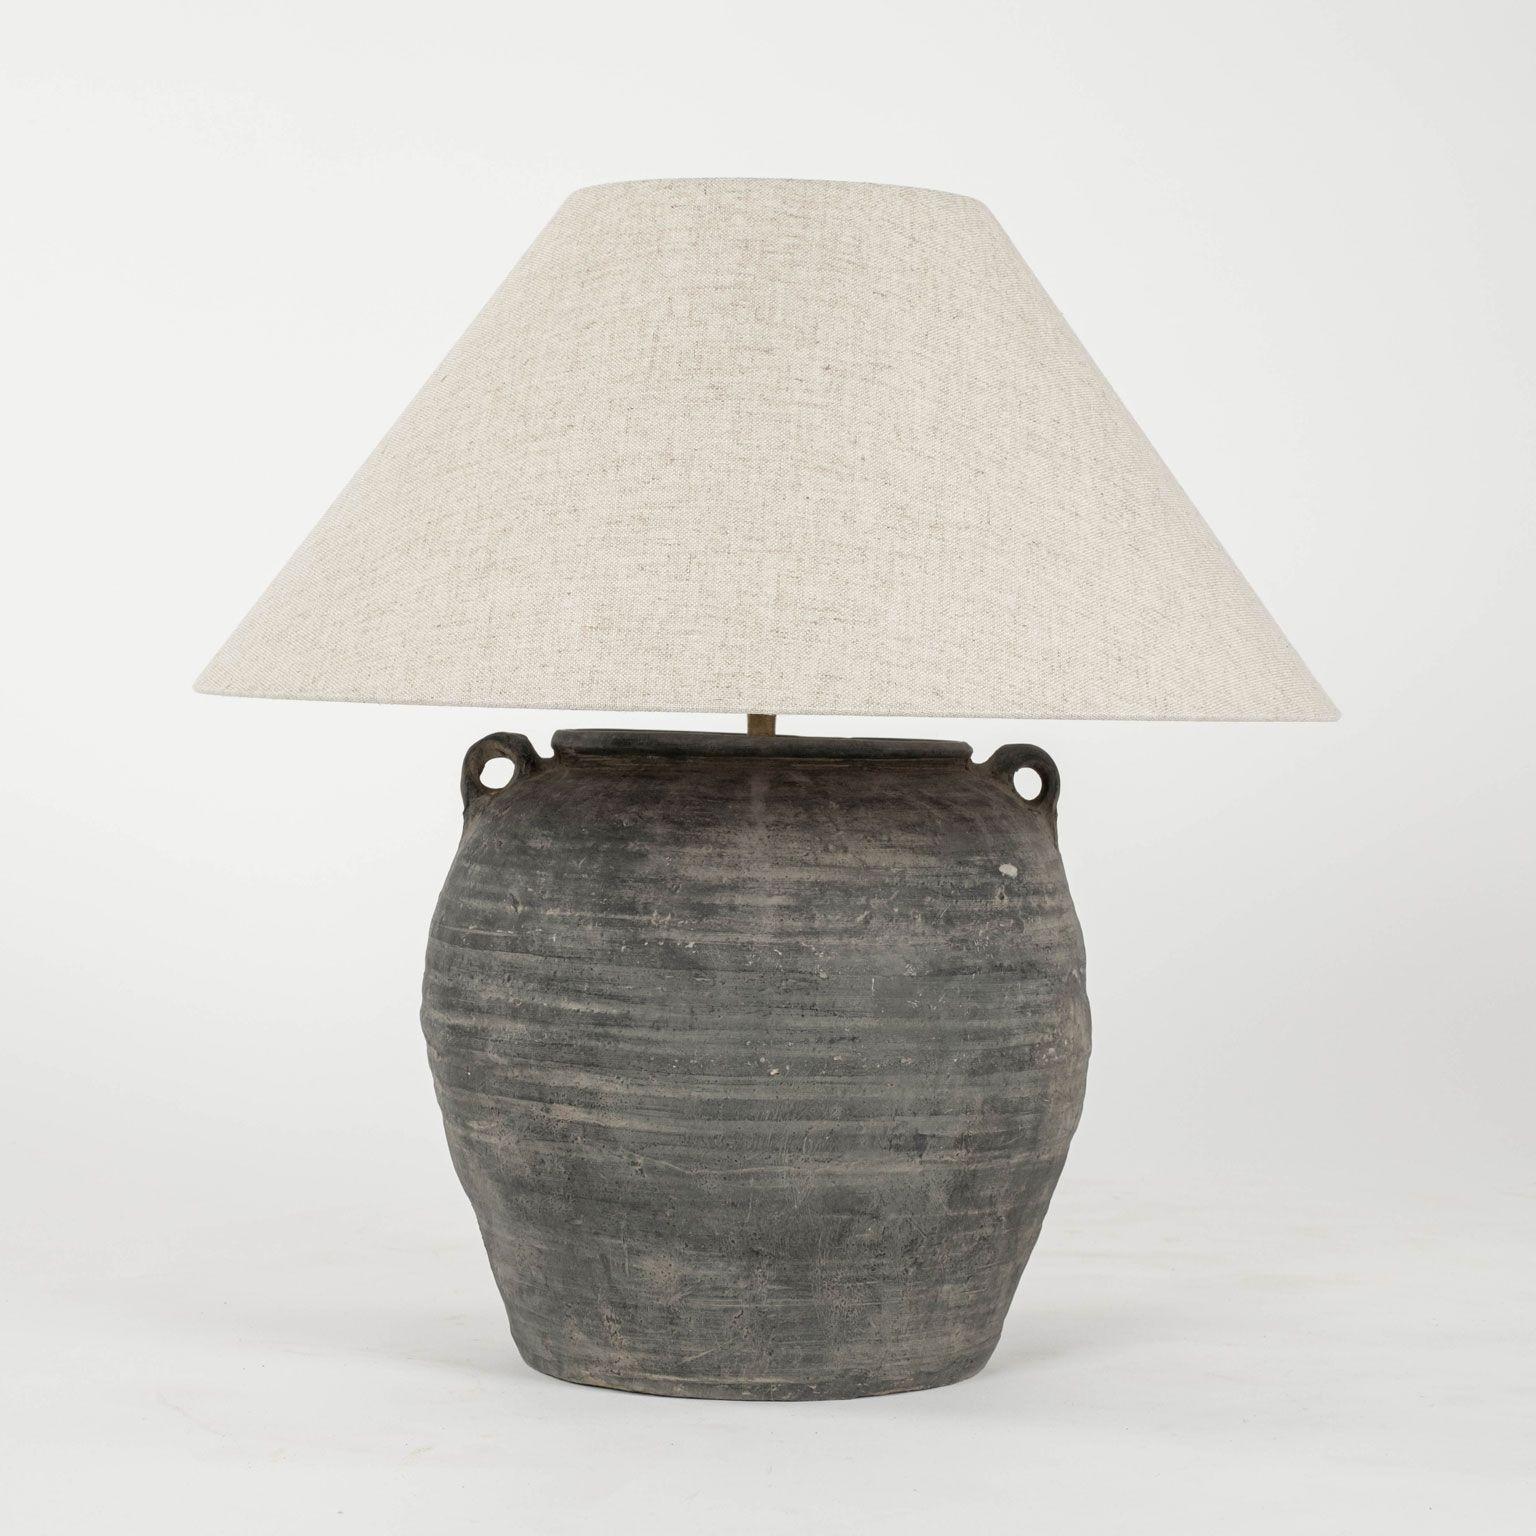 Black unglazed lamp with handles and linen shade. Hand-made ceramic jar, newly wired as custom table lamp. Lamp measures 22.5 inches high and 21.5 inches diameter (with shade), and without a shade the diameter is 13 inches and height is 15.5 inches